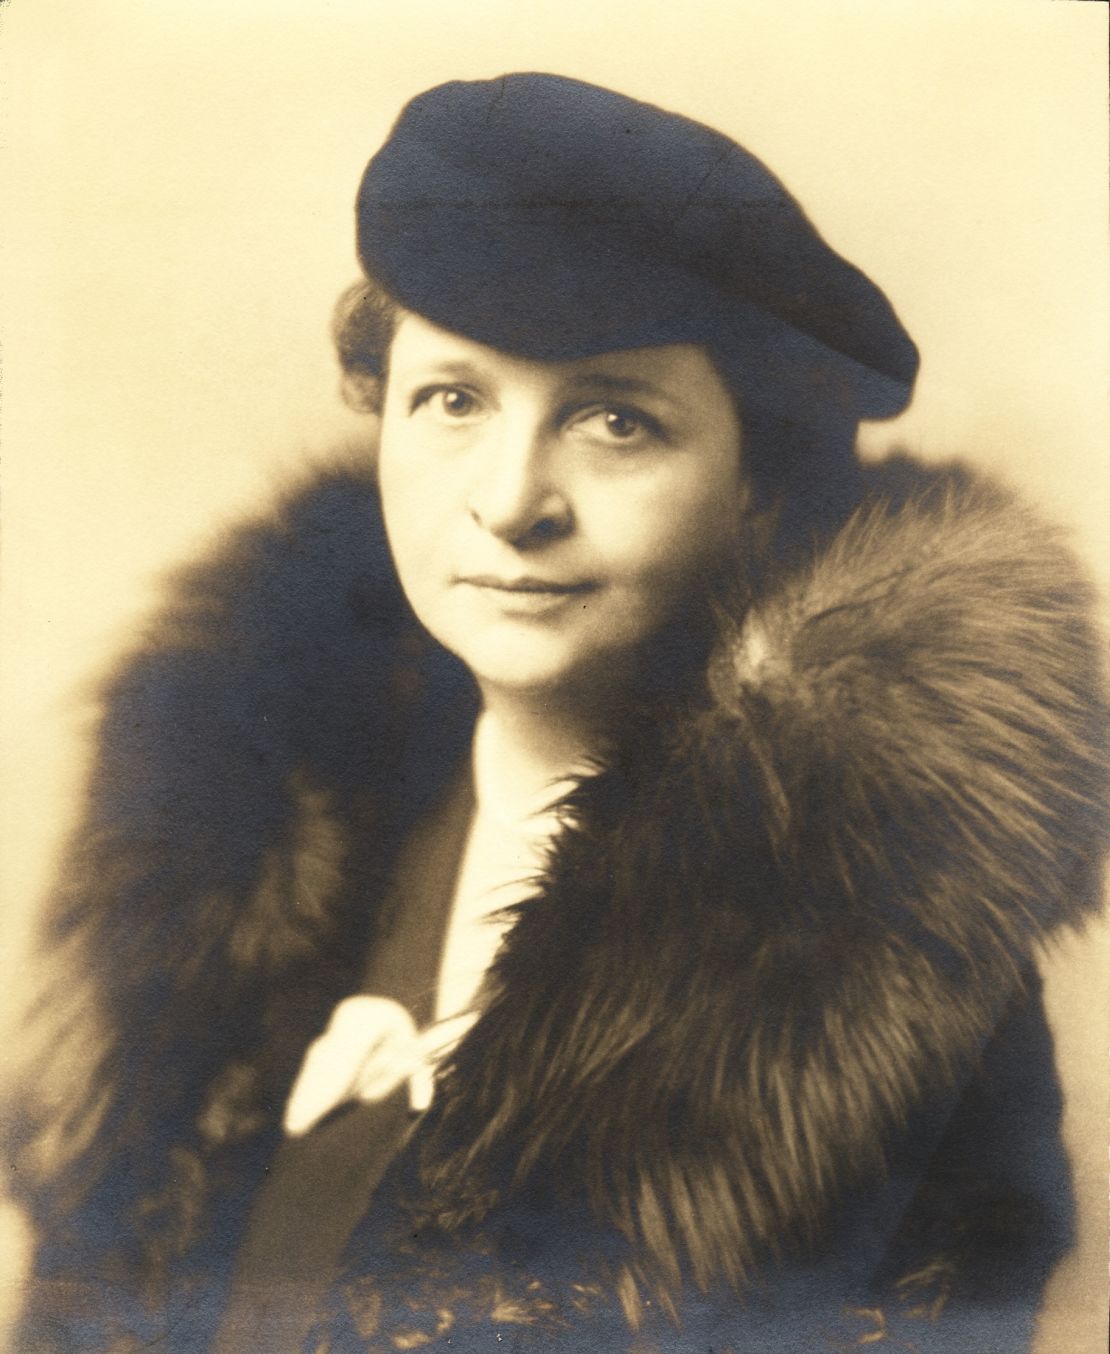 Frances Perkins, who served as US Secretary of Labor during the Great Depression, was the chief architect behind Social Security, unemployment insurance, the 40-hour work week and the minimum wage. (Frances Perkins Center)